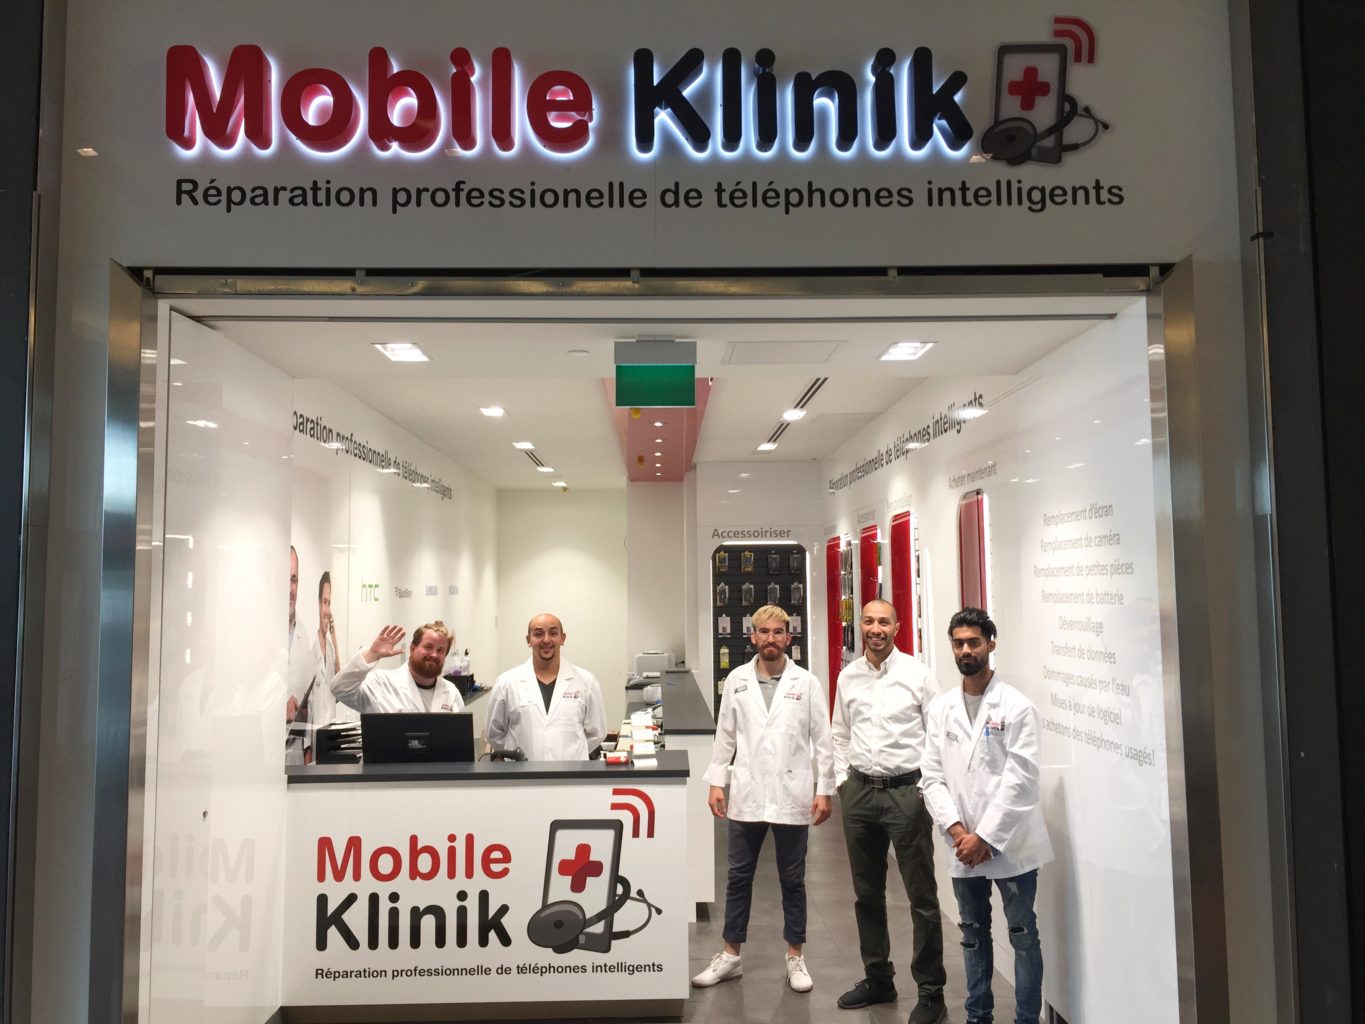 Welcome to Mobile Klinik St. Bruno